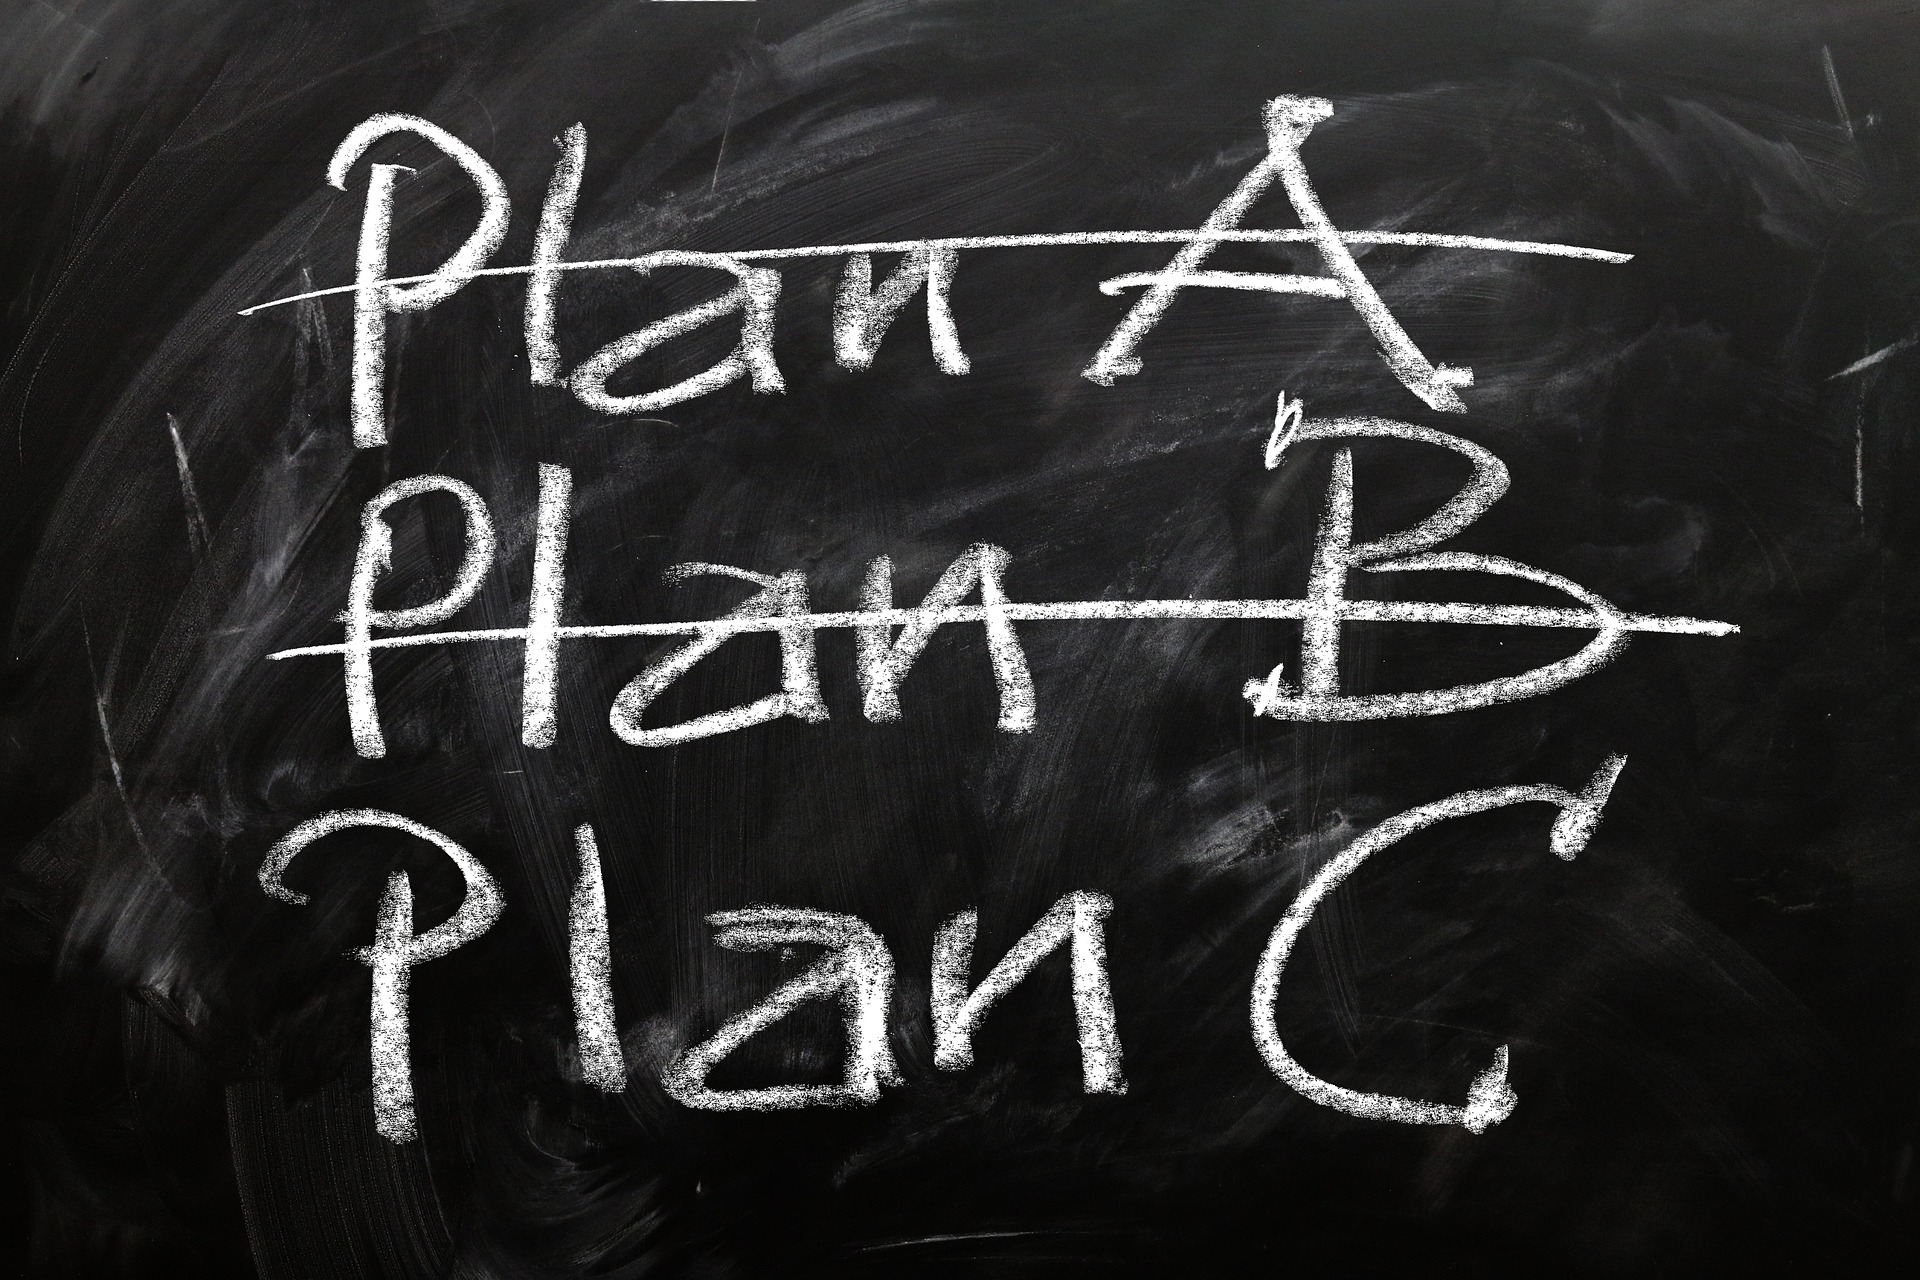 Is "follow the plan" the best advice?